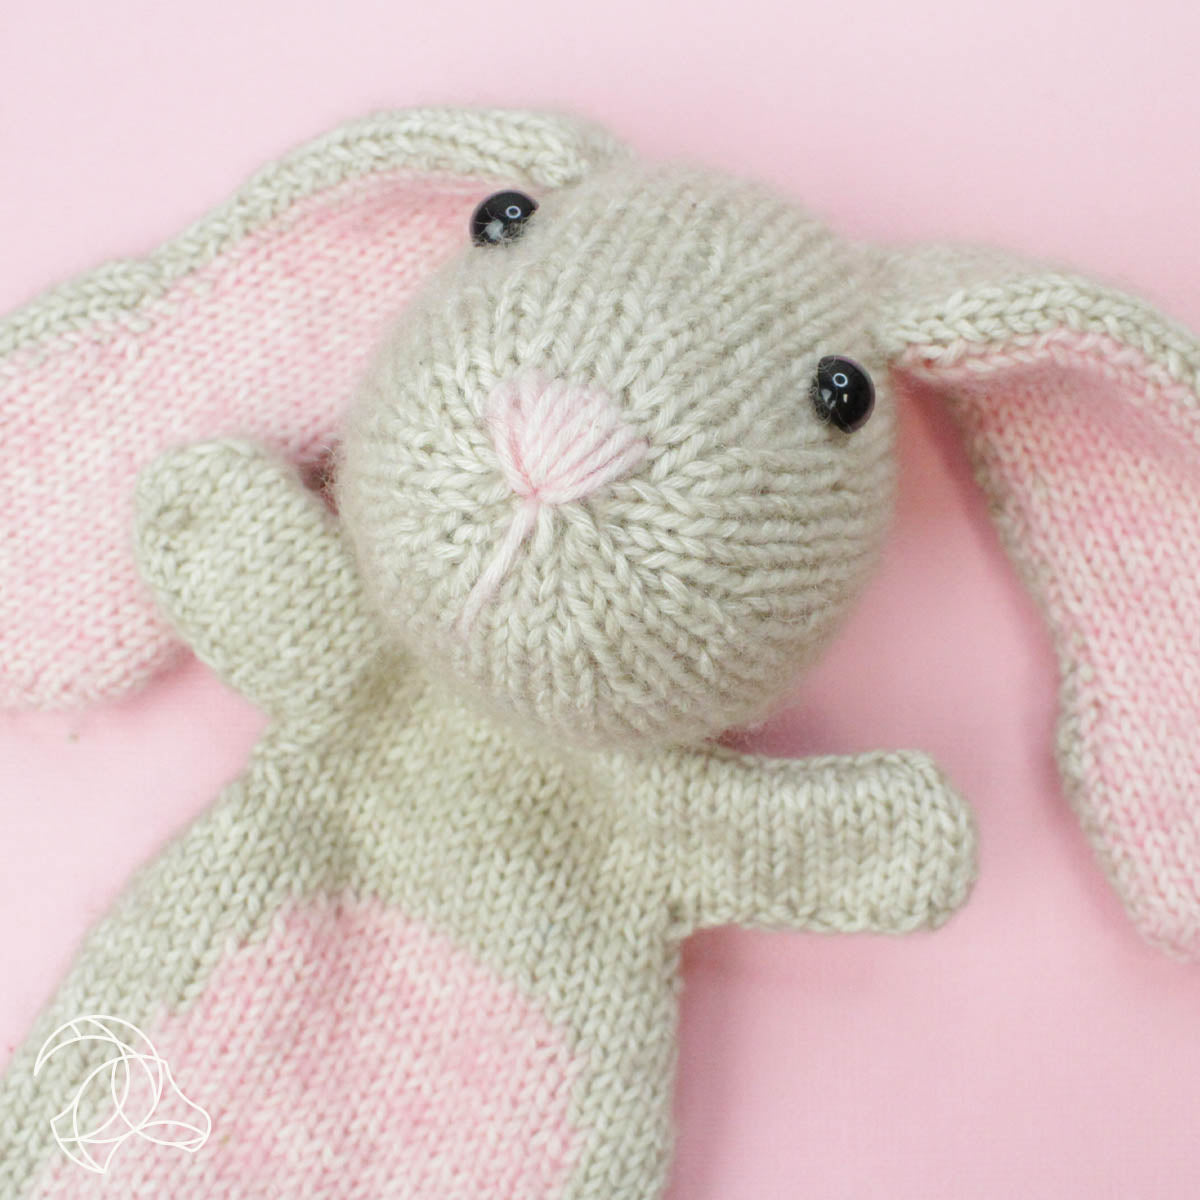 Bunny Rabbit Knitting Kit - His Name is Doutze and he is the Cutest!